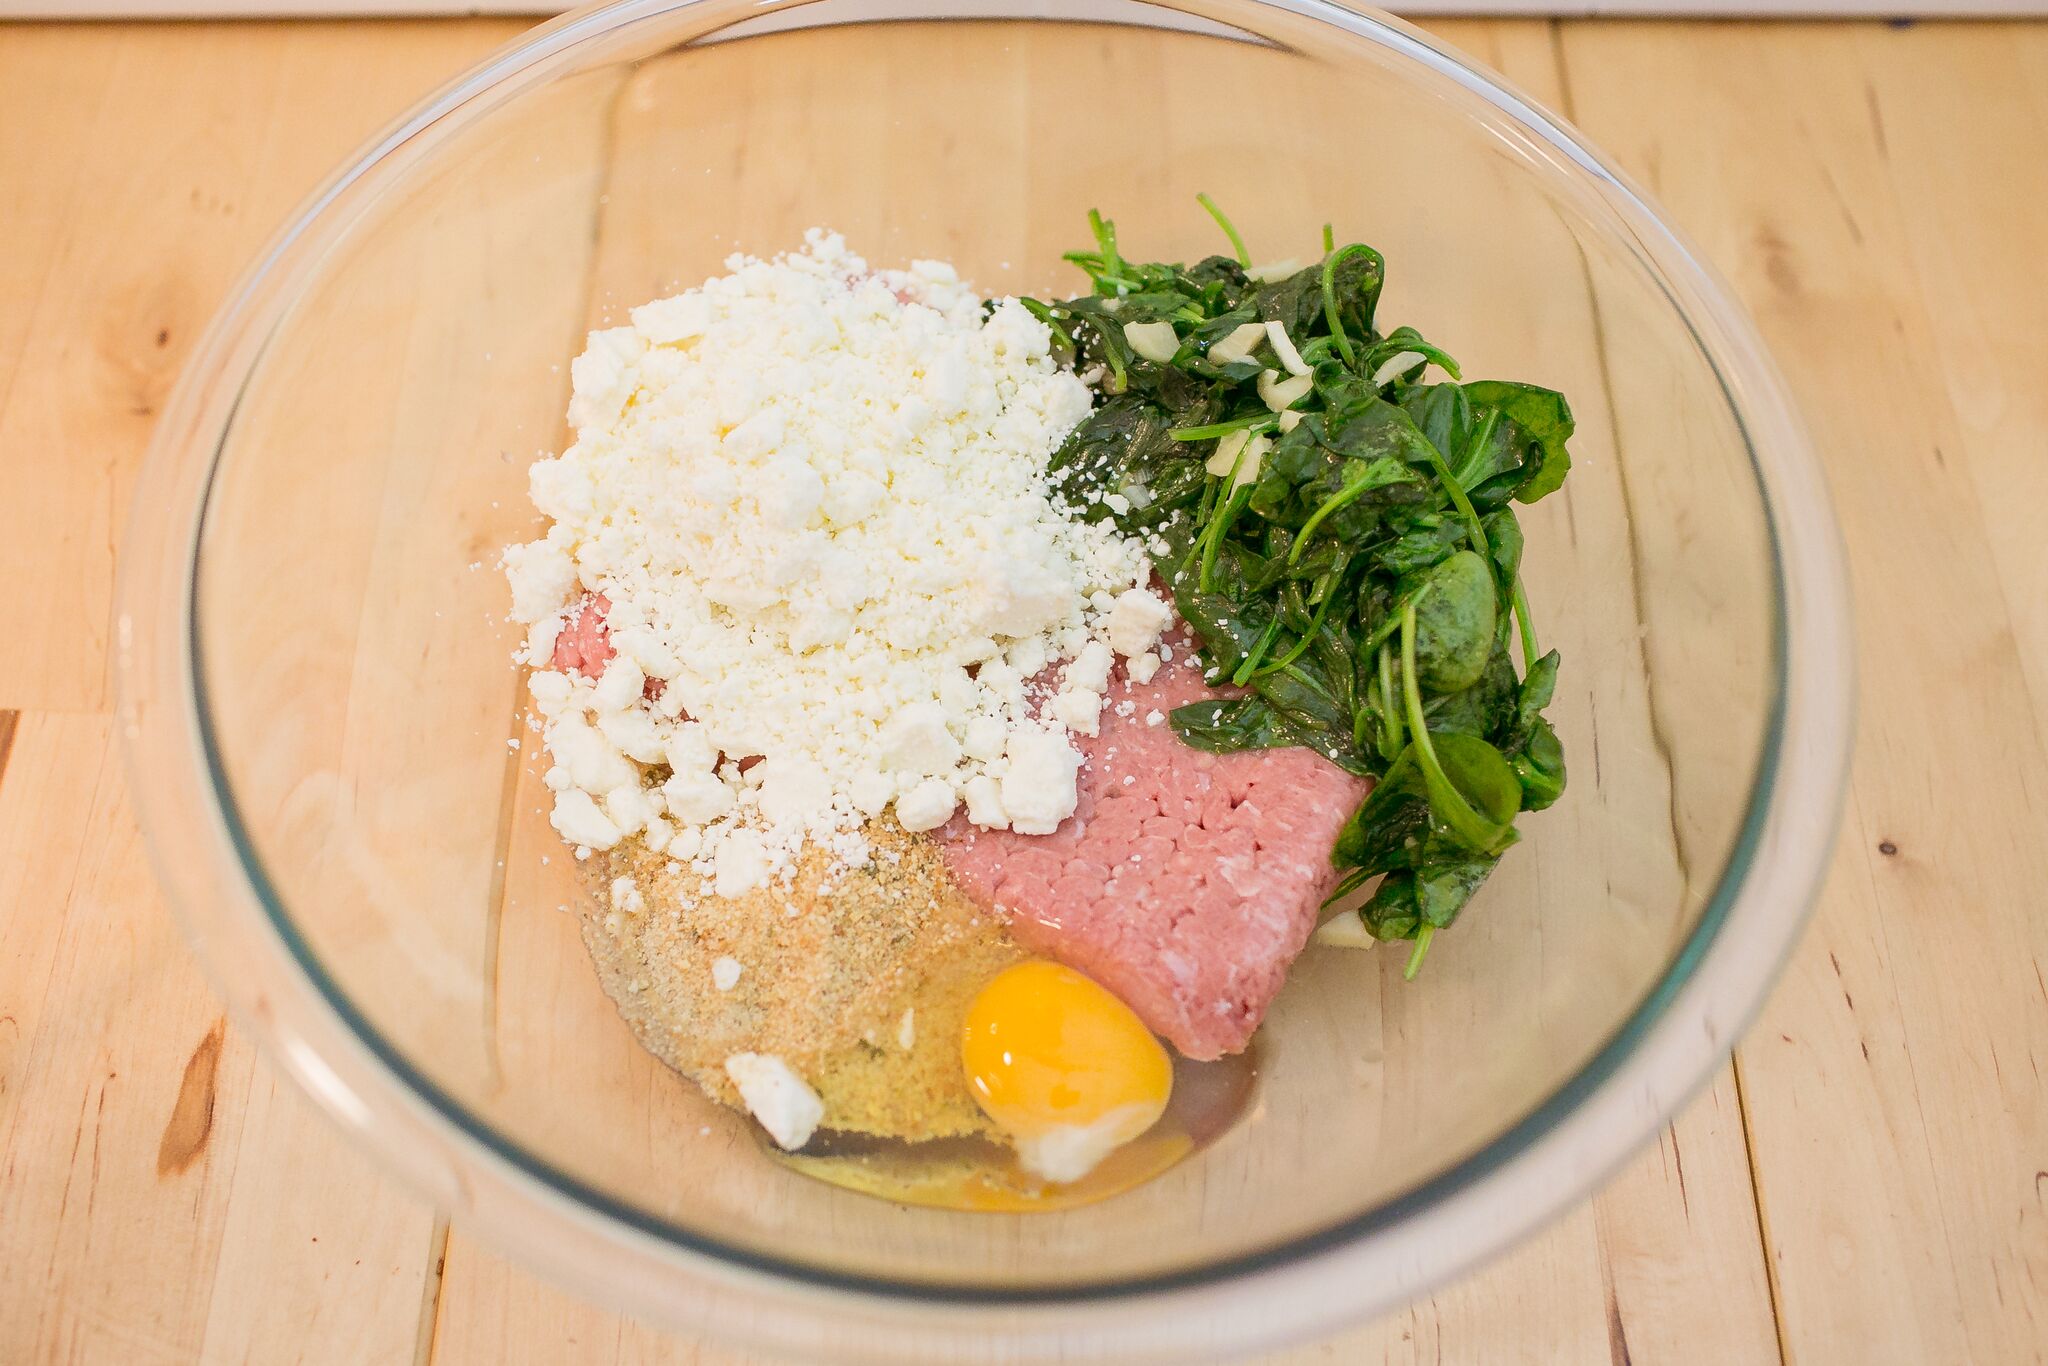 Combine meat, breadcrumbs, cheese, an egg, and spinach in a bowl